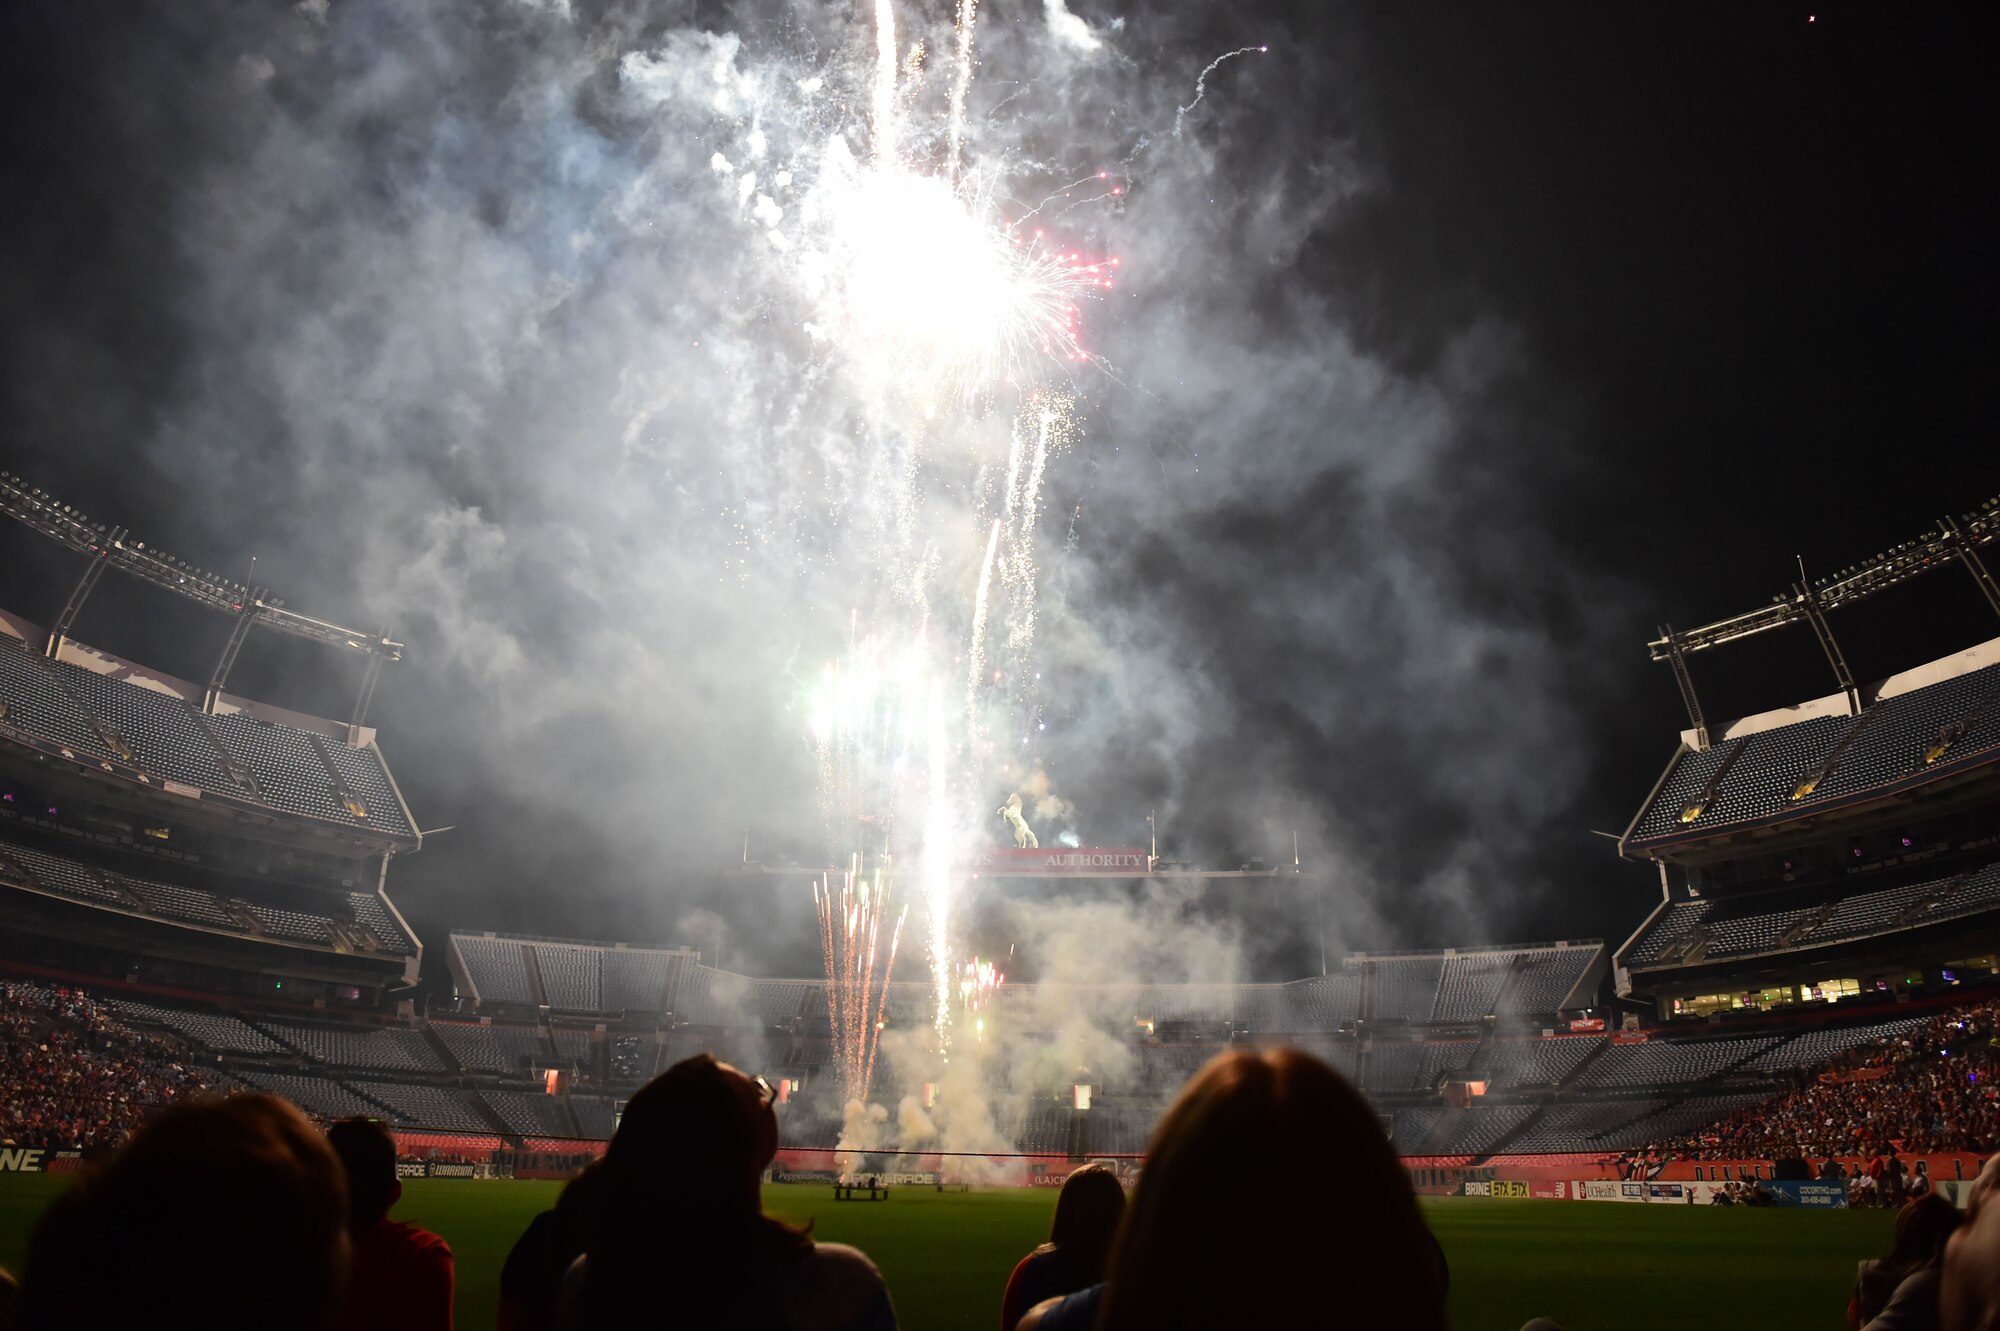 A fireworks display was provided for fans who attended the Denver Outlaws lacrosse game July 4, 2015, at Sports Authority Field at Mile High Stadium in Denver. The Outlaws played the Boston Cannons and honored military members after the game. (U.S. Air Force photo by Airman 1st Class Luke W. Nowakowski/Released)